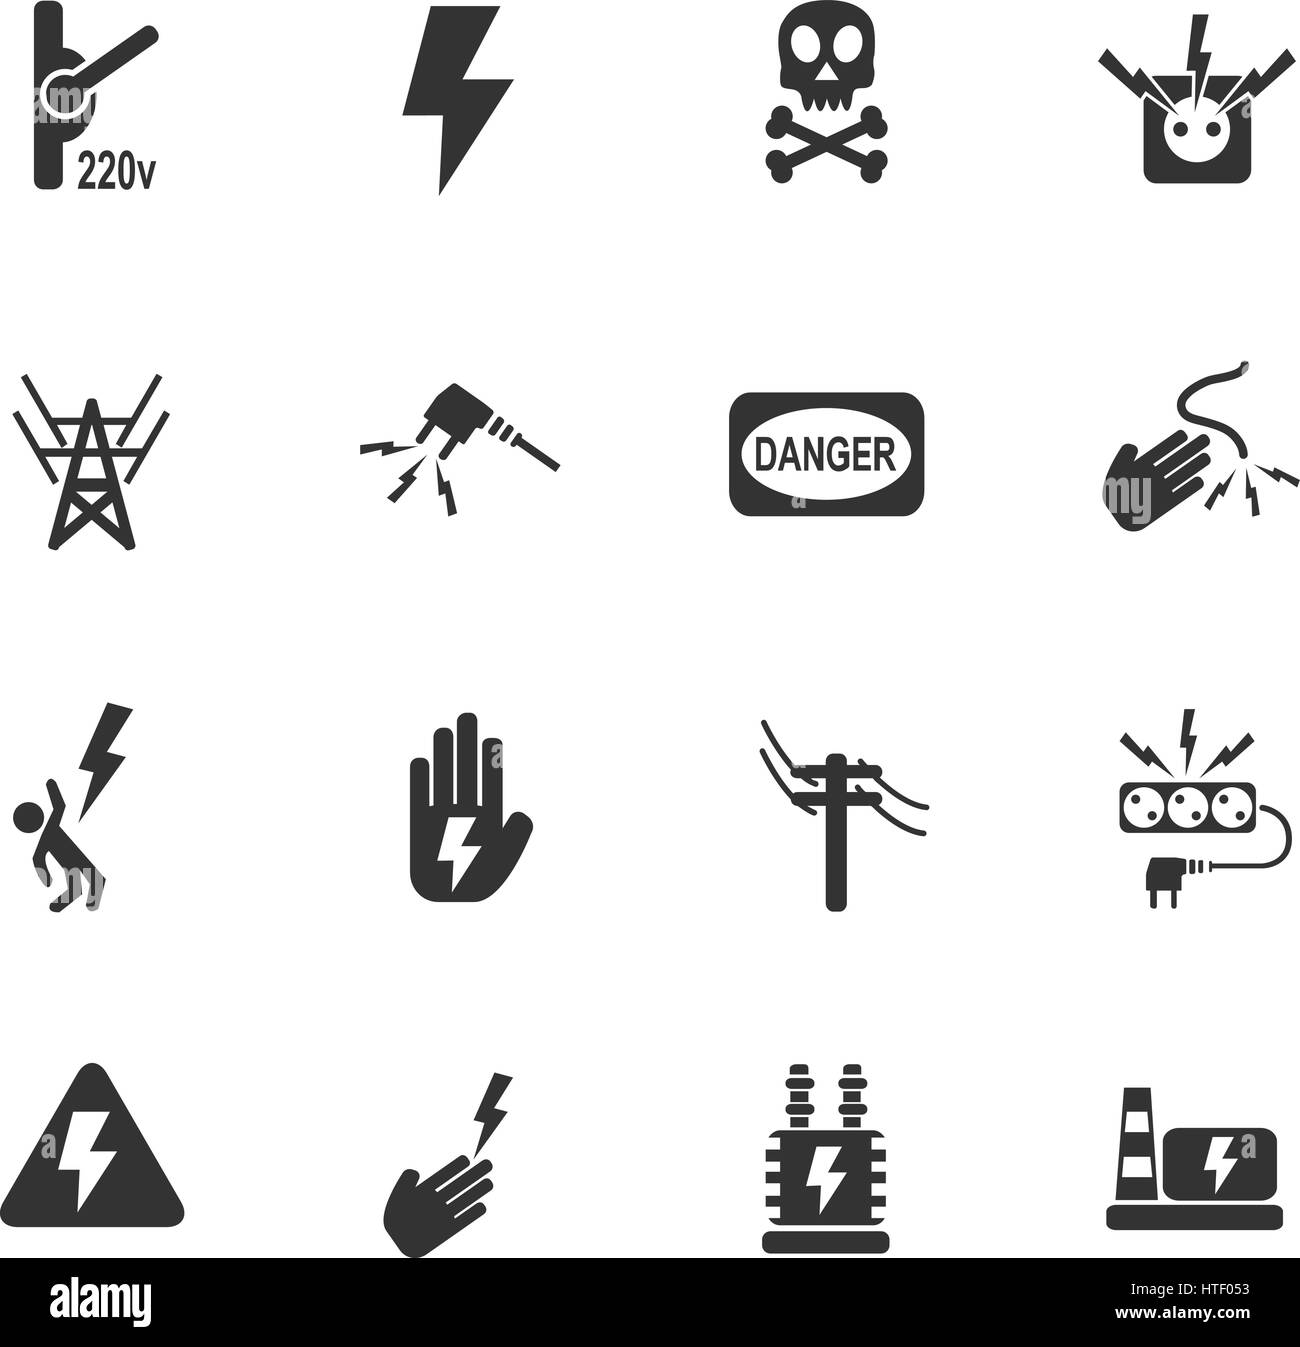 high voltage web icons for user interface design Stock Vector